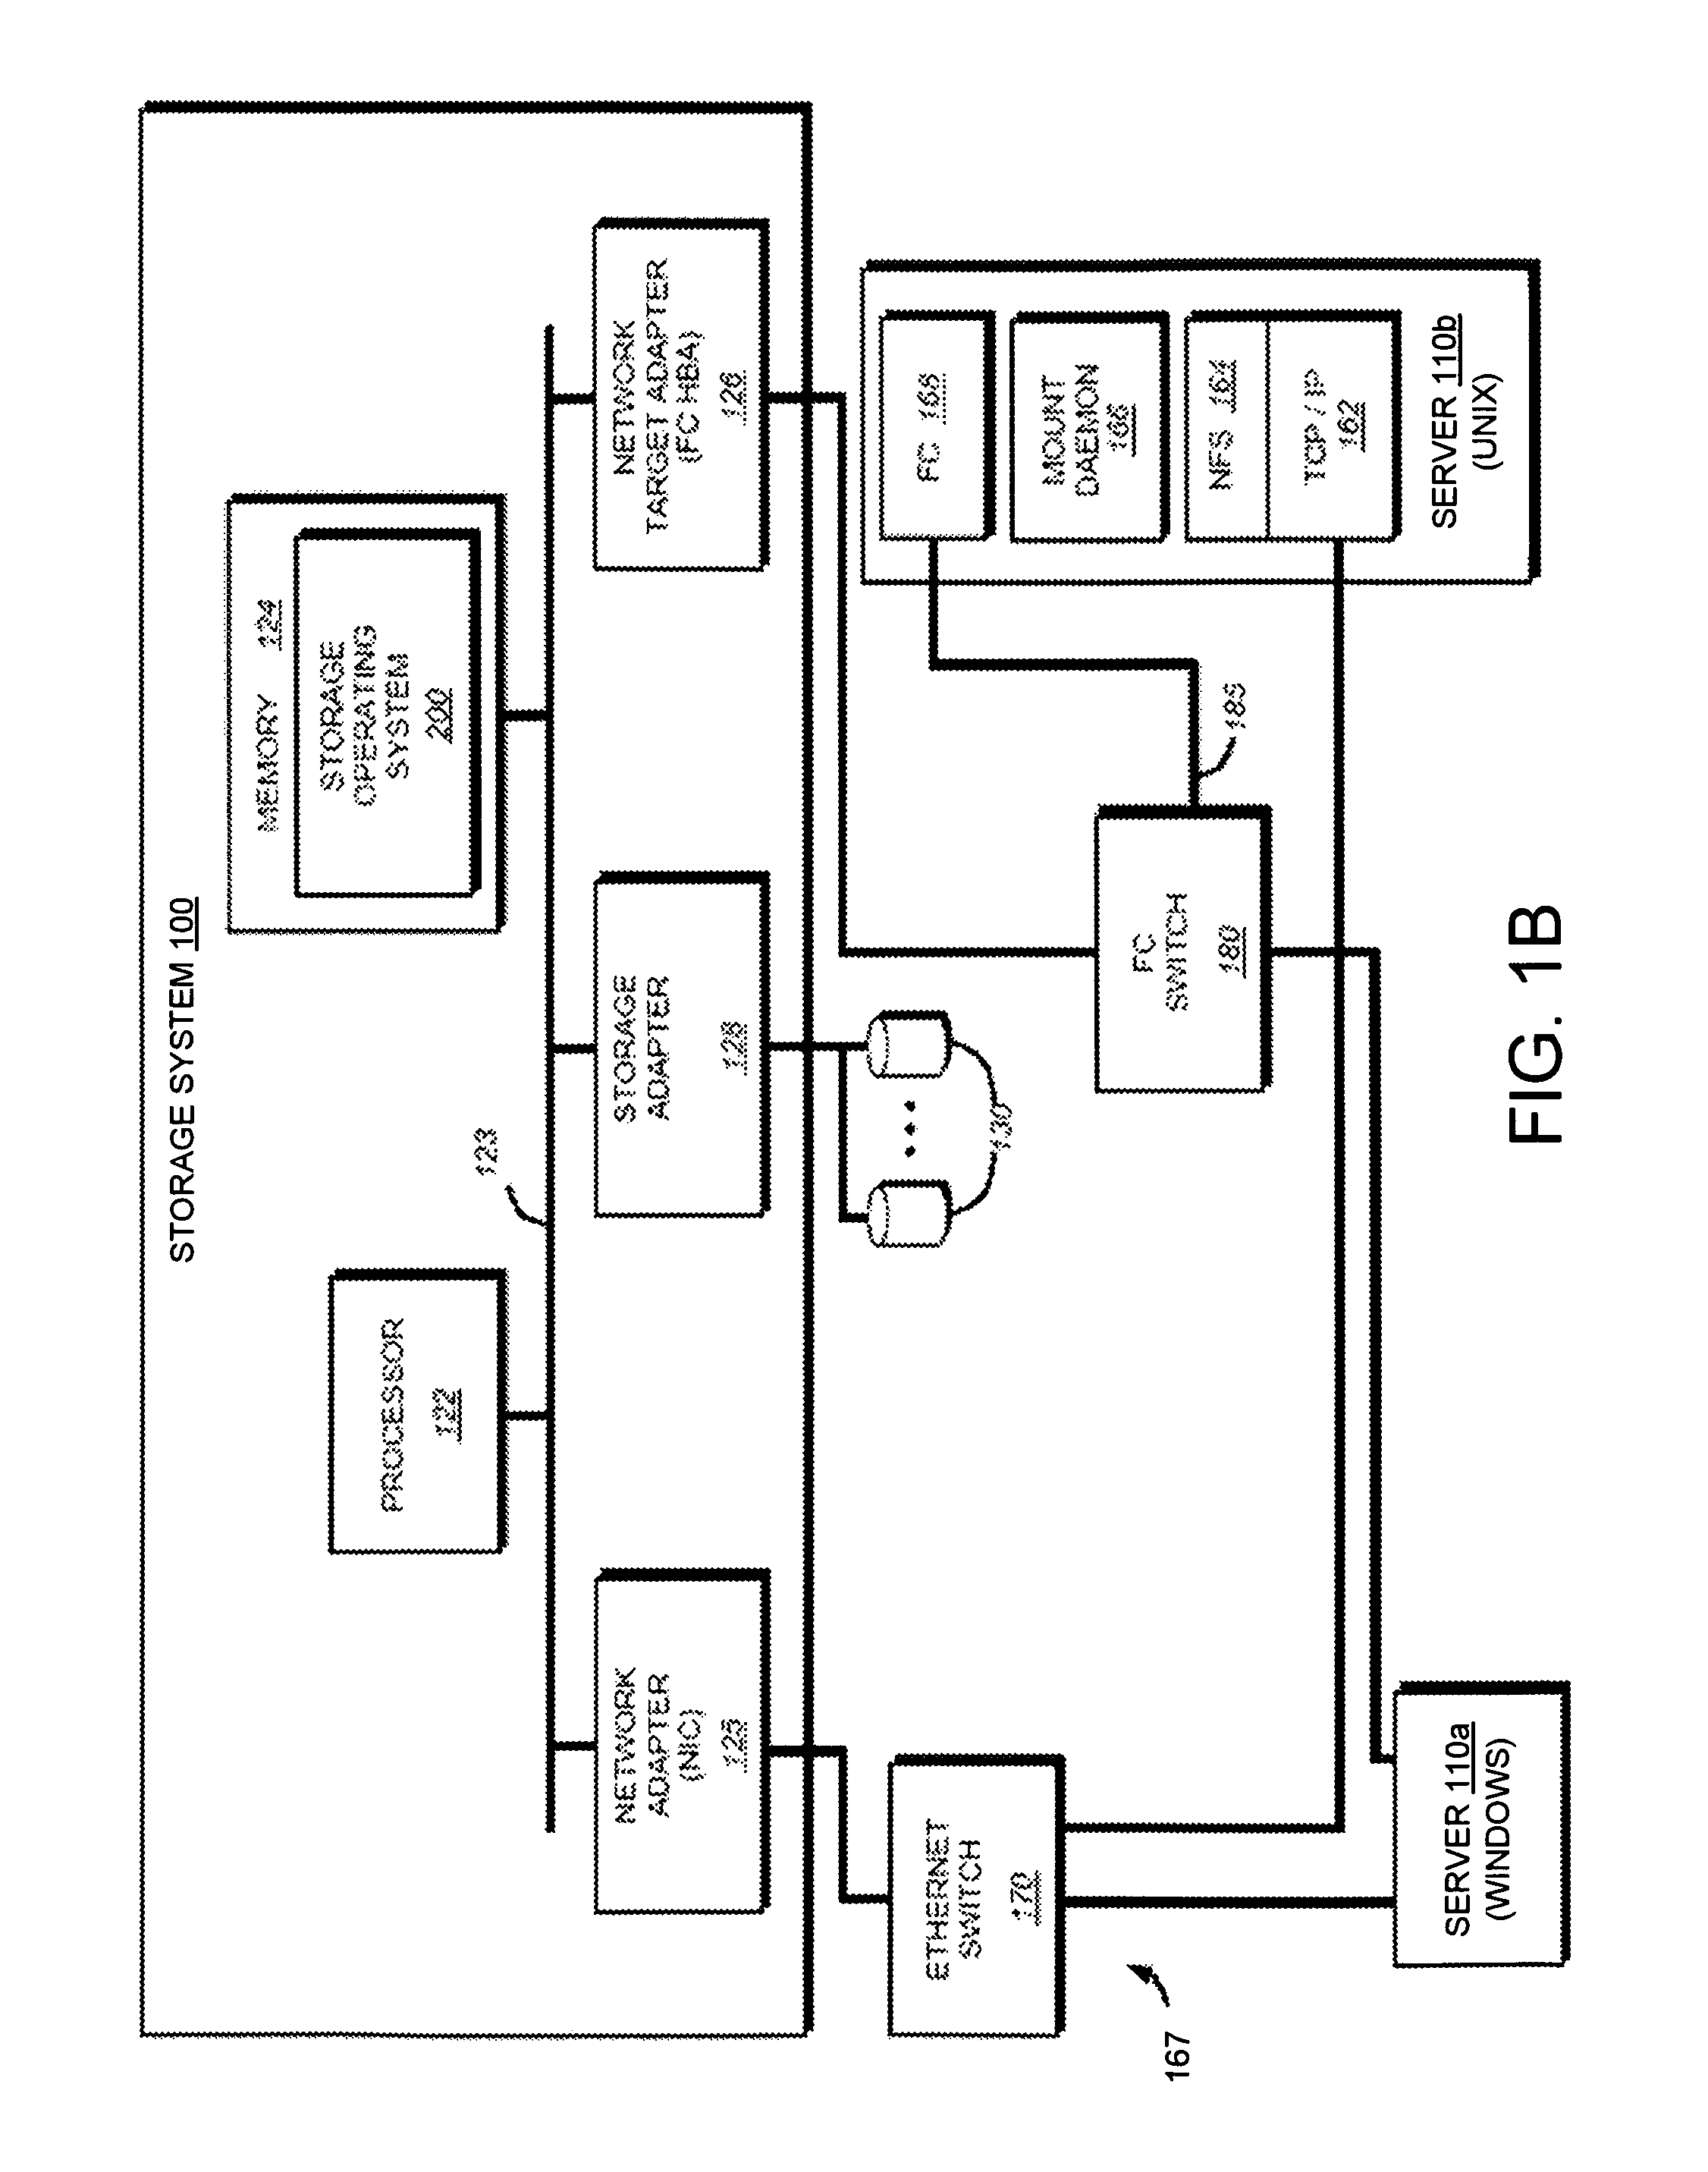 System and method for storage and deployment of virtual machines in a virtual server environment